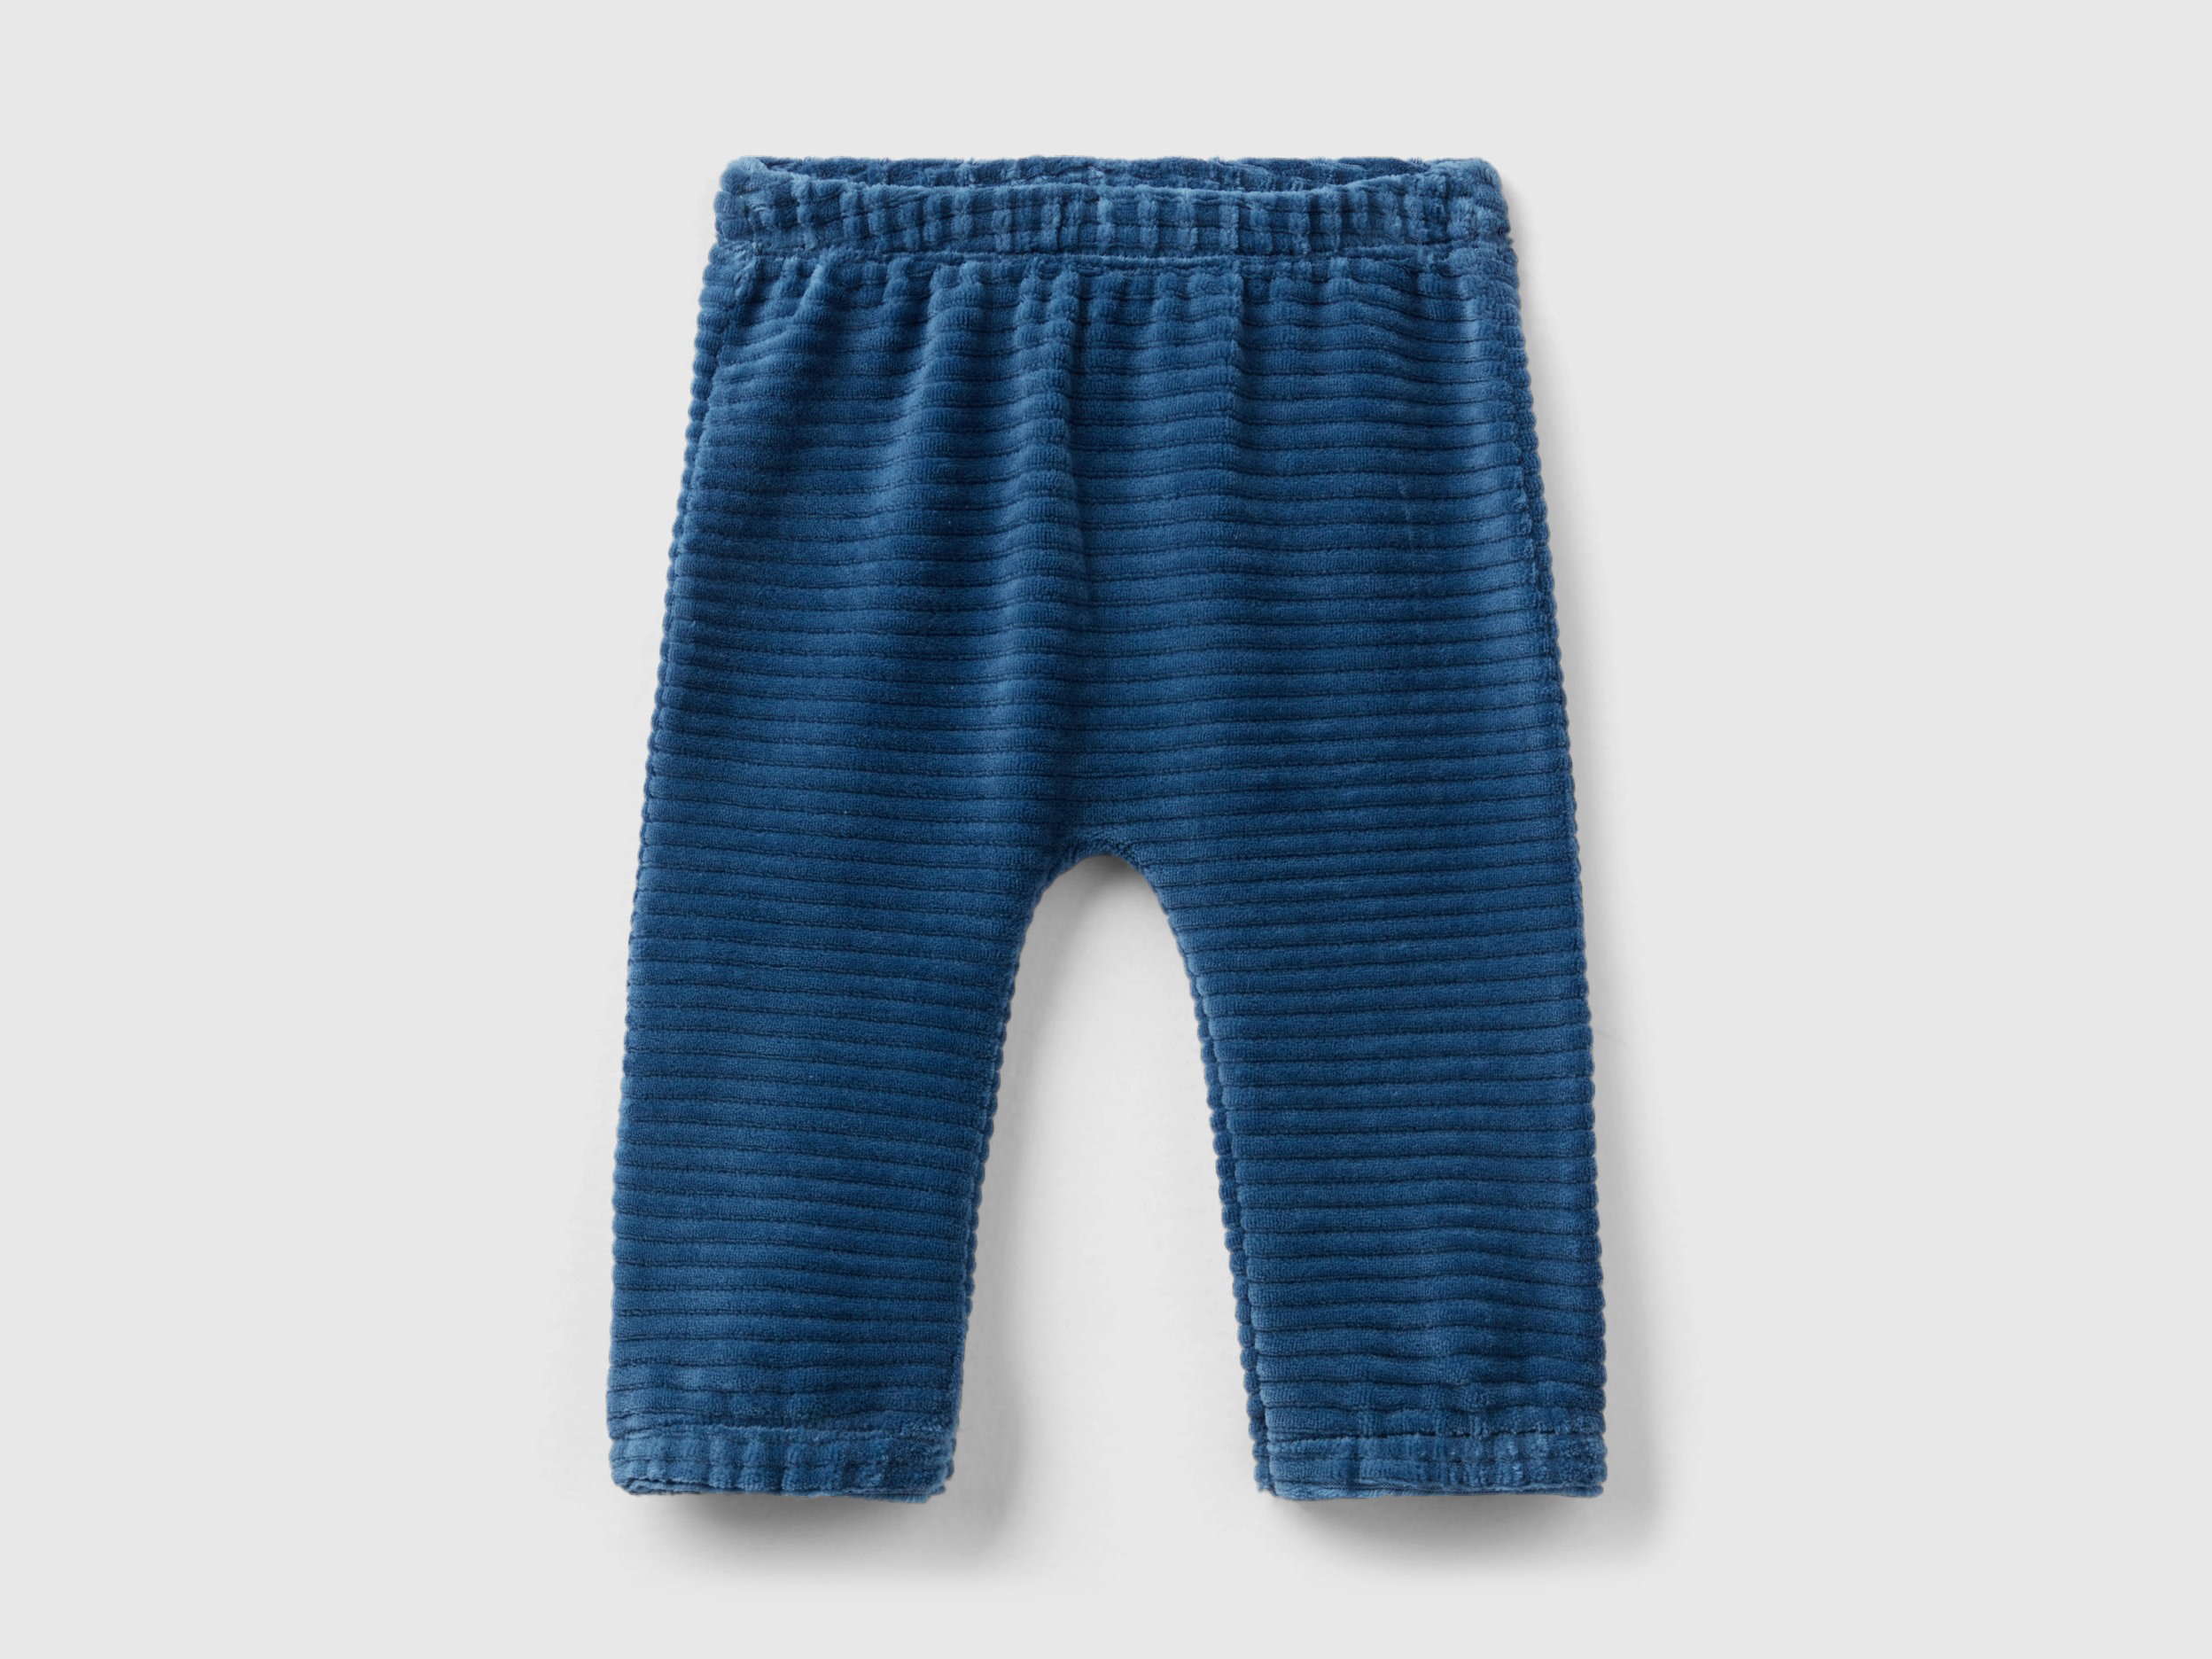 Benetton, Chenille Trousers With Embroidery, size 6-9, Blue, Kids